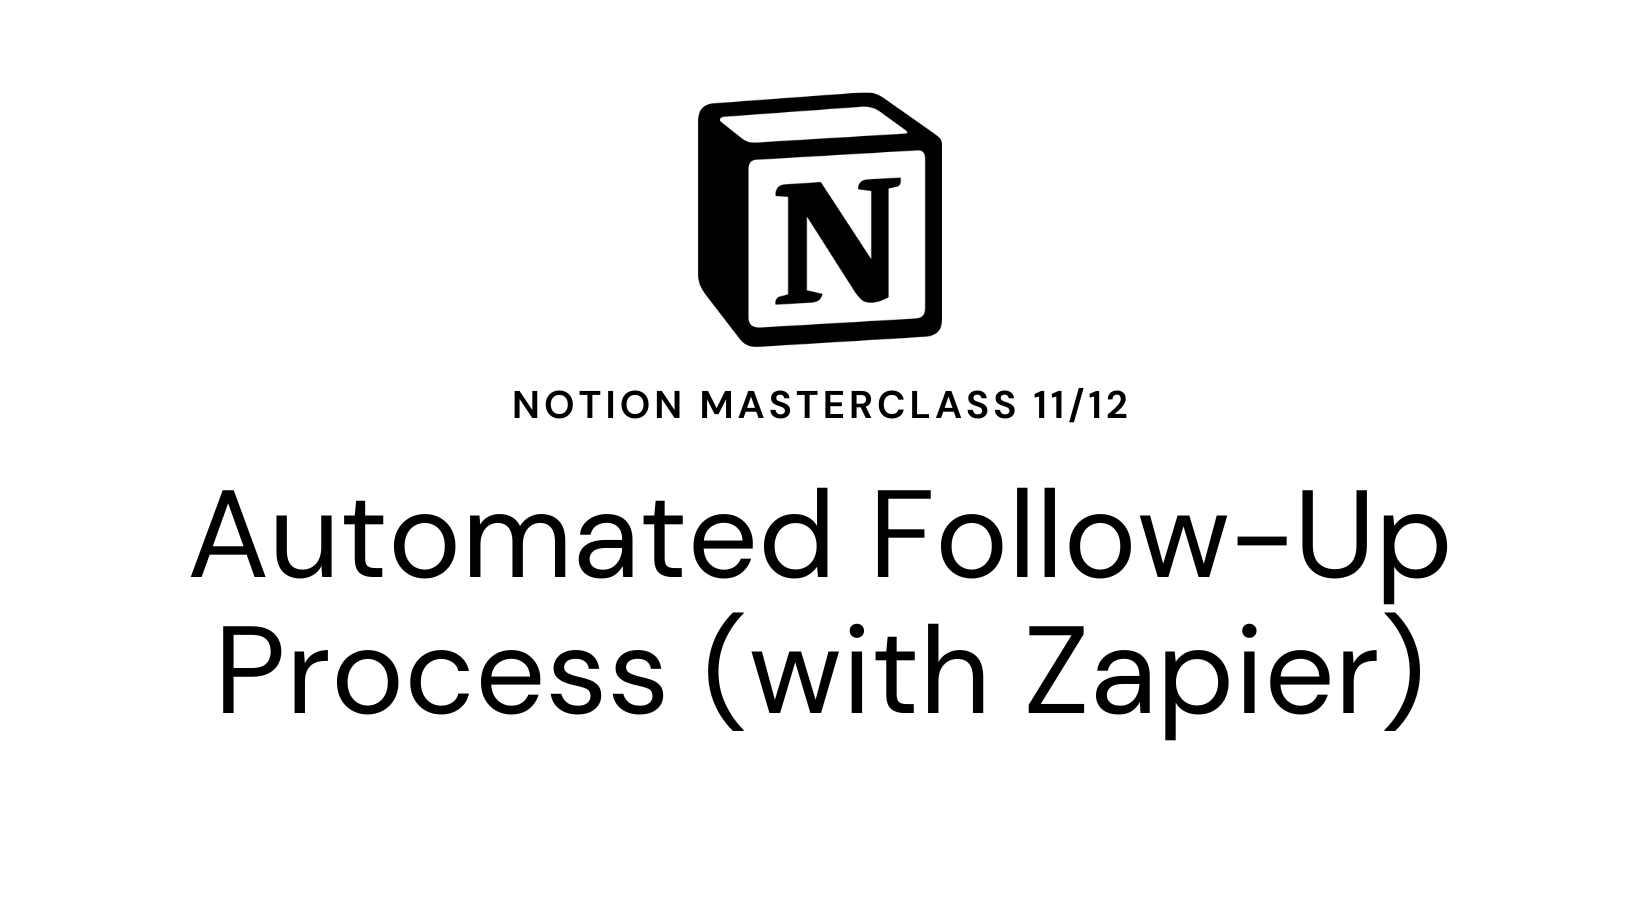 Streamline Your Follow-Up Process with Automated Emails in Notion Using Zapier